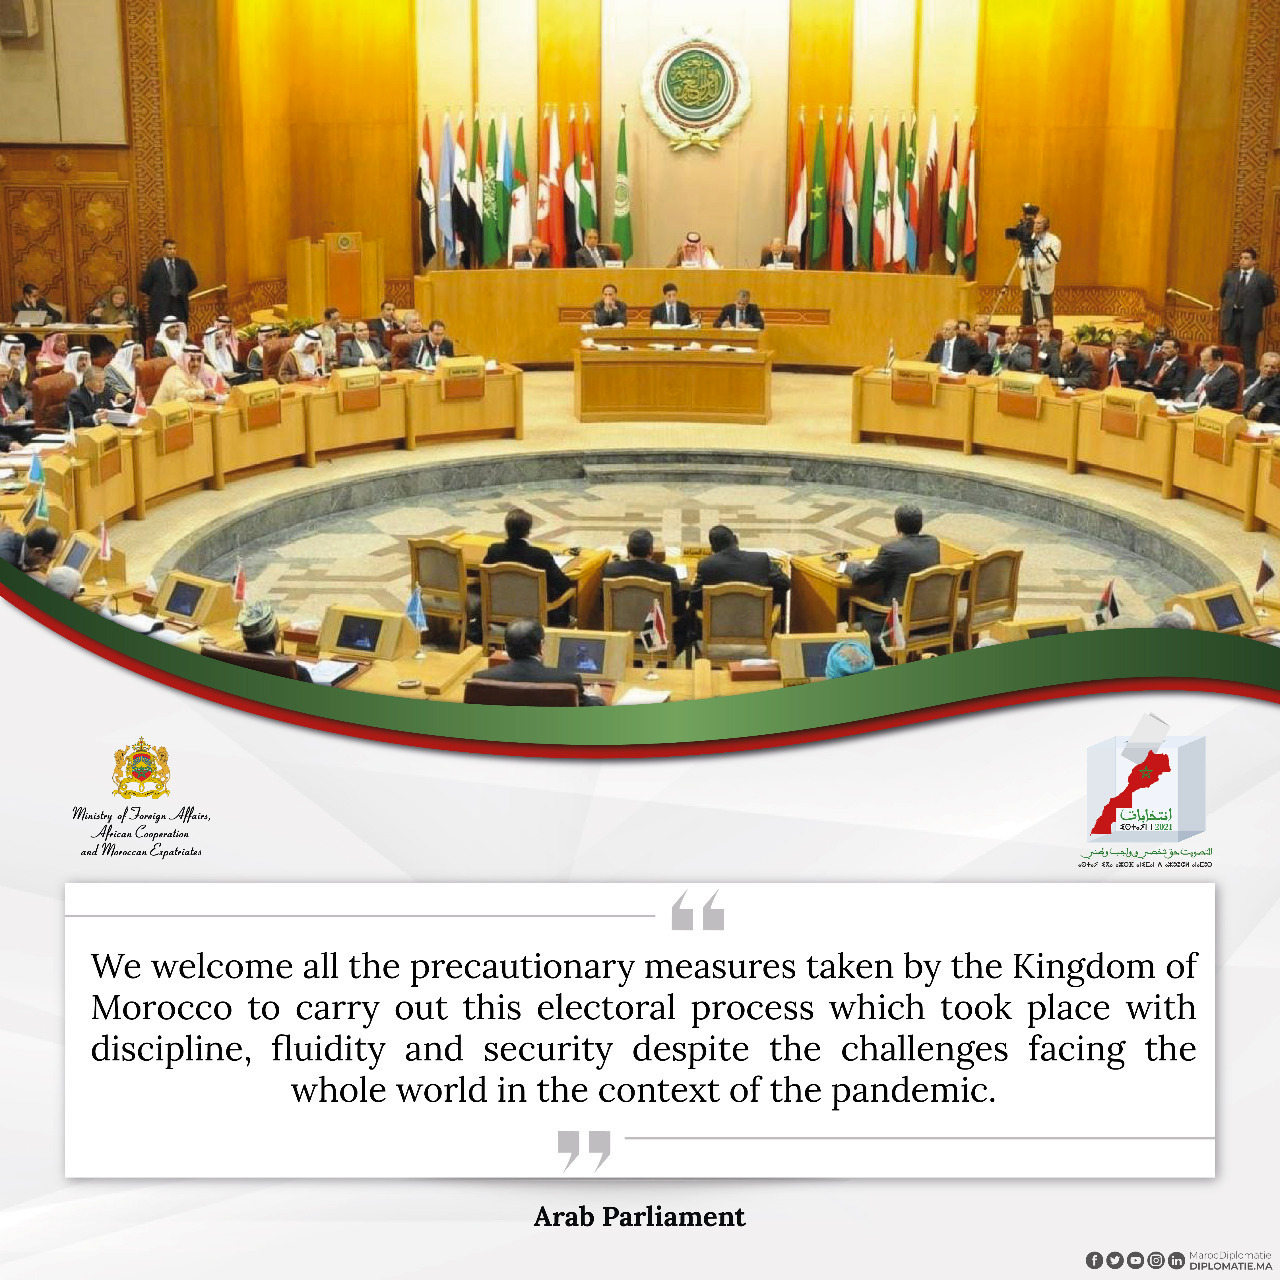 Arab Parliament welcomes the precautionary measures taken by the Kingdom of Morocco to complete the 2021 electoral process Arab parliament